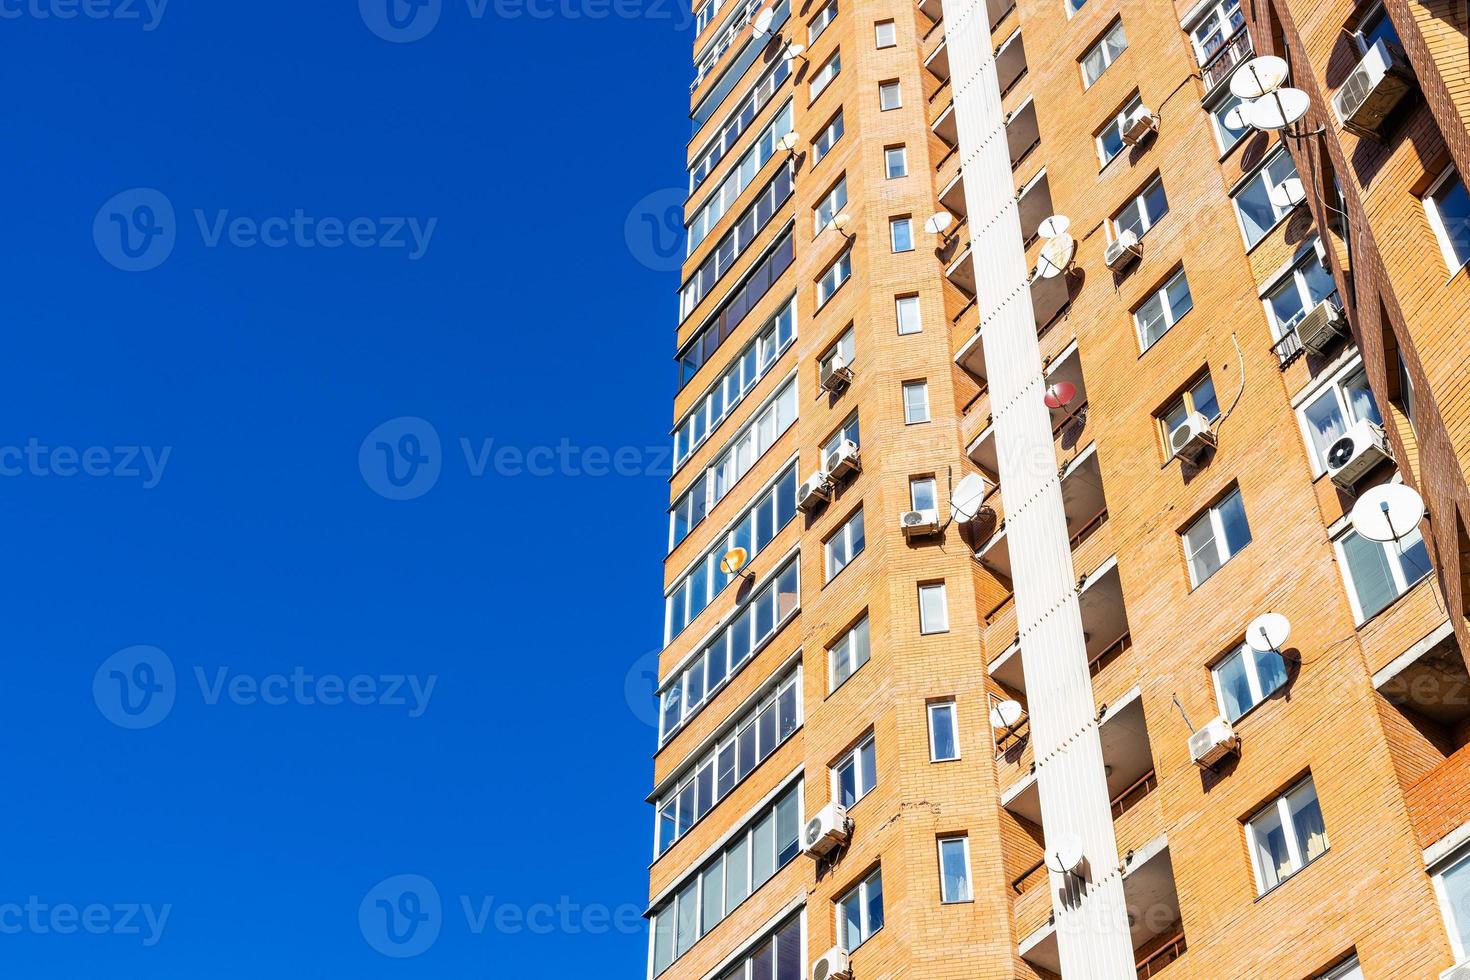 high-rise apartment house and blue sky photo